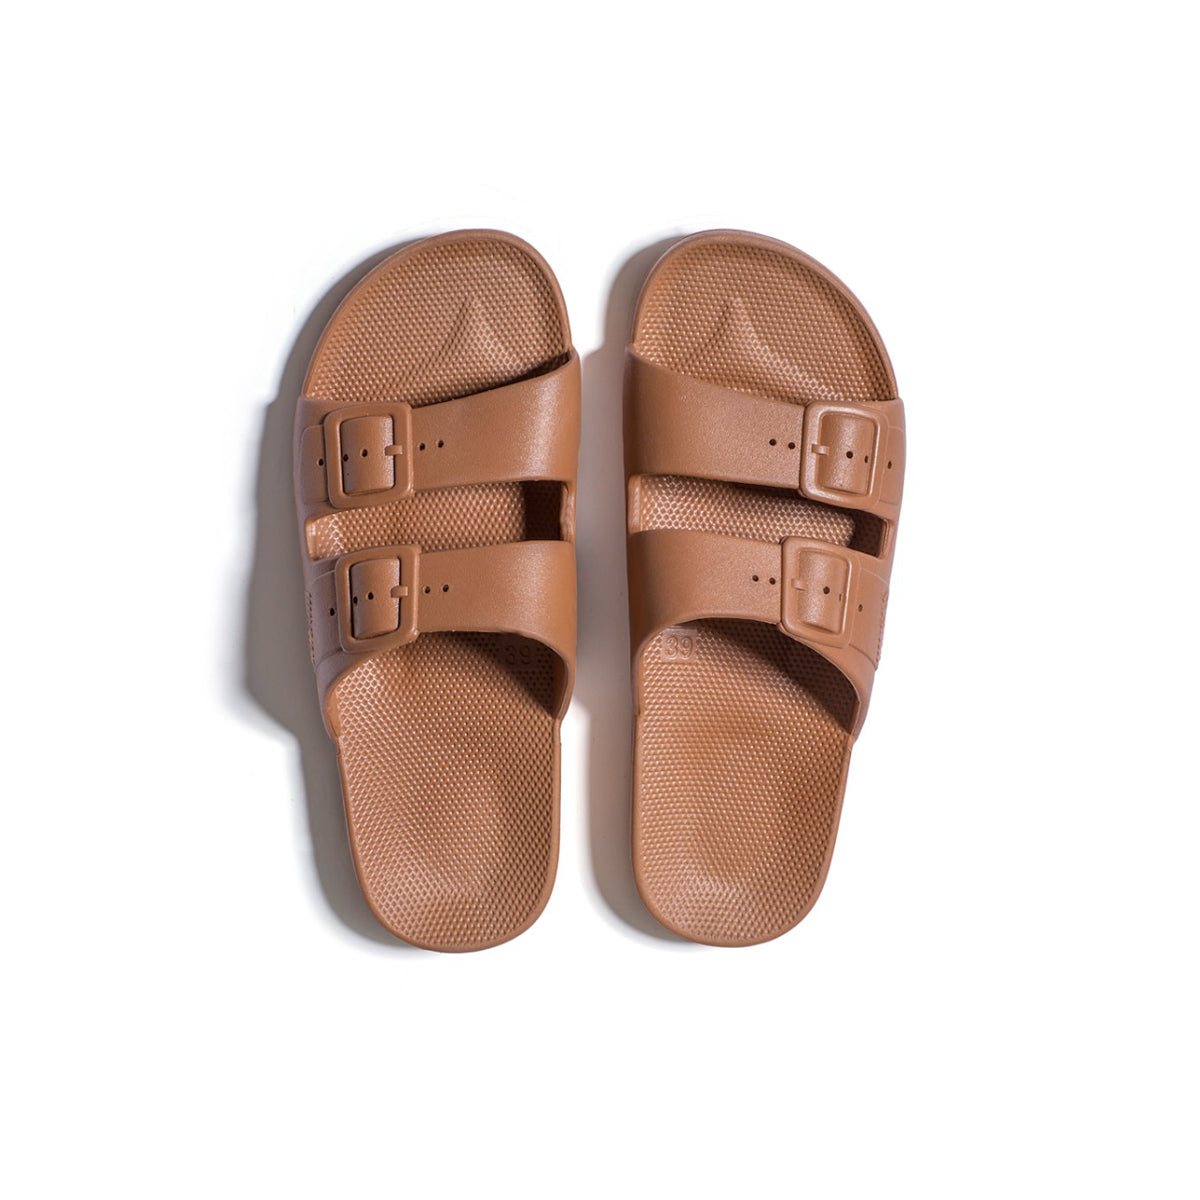 Toffee Sandals